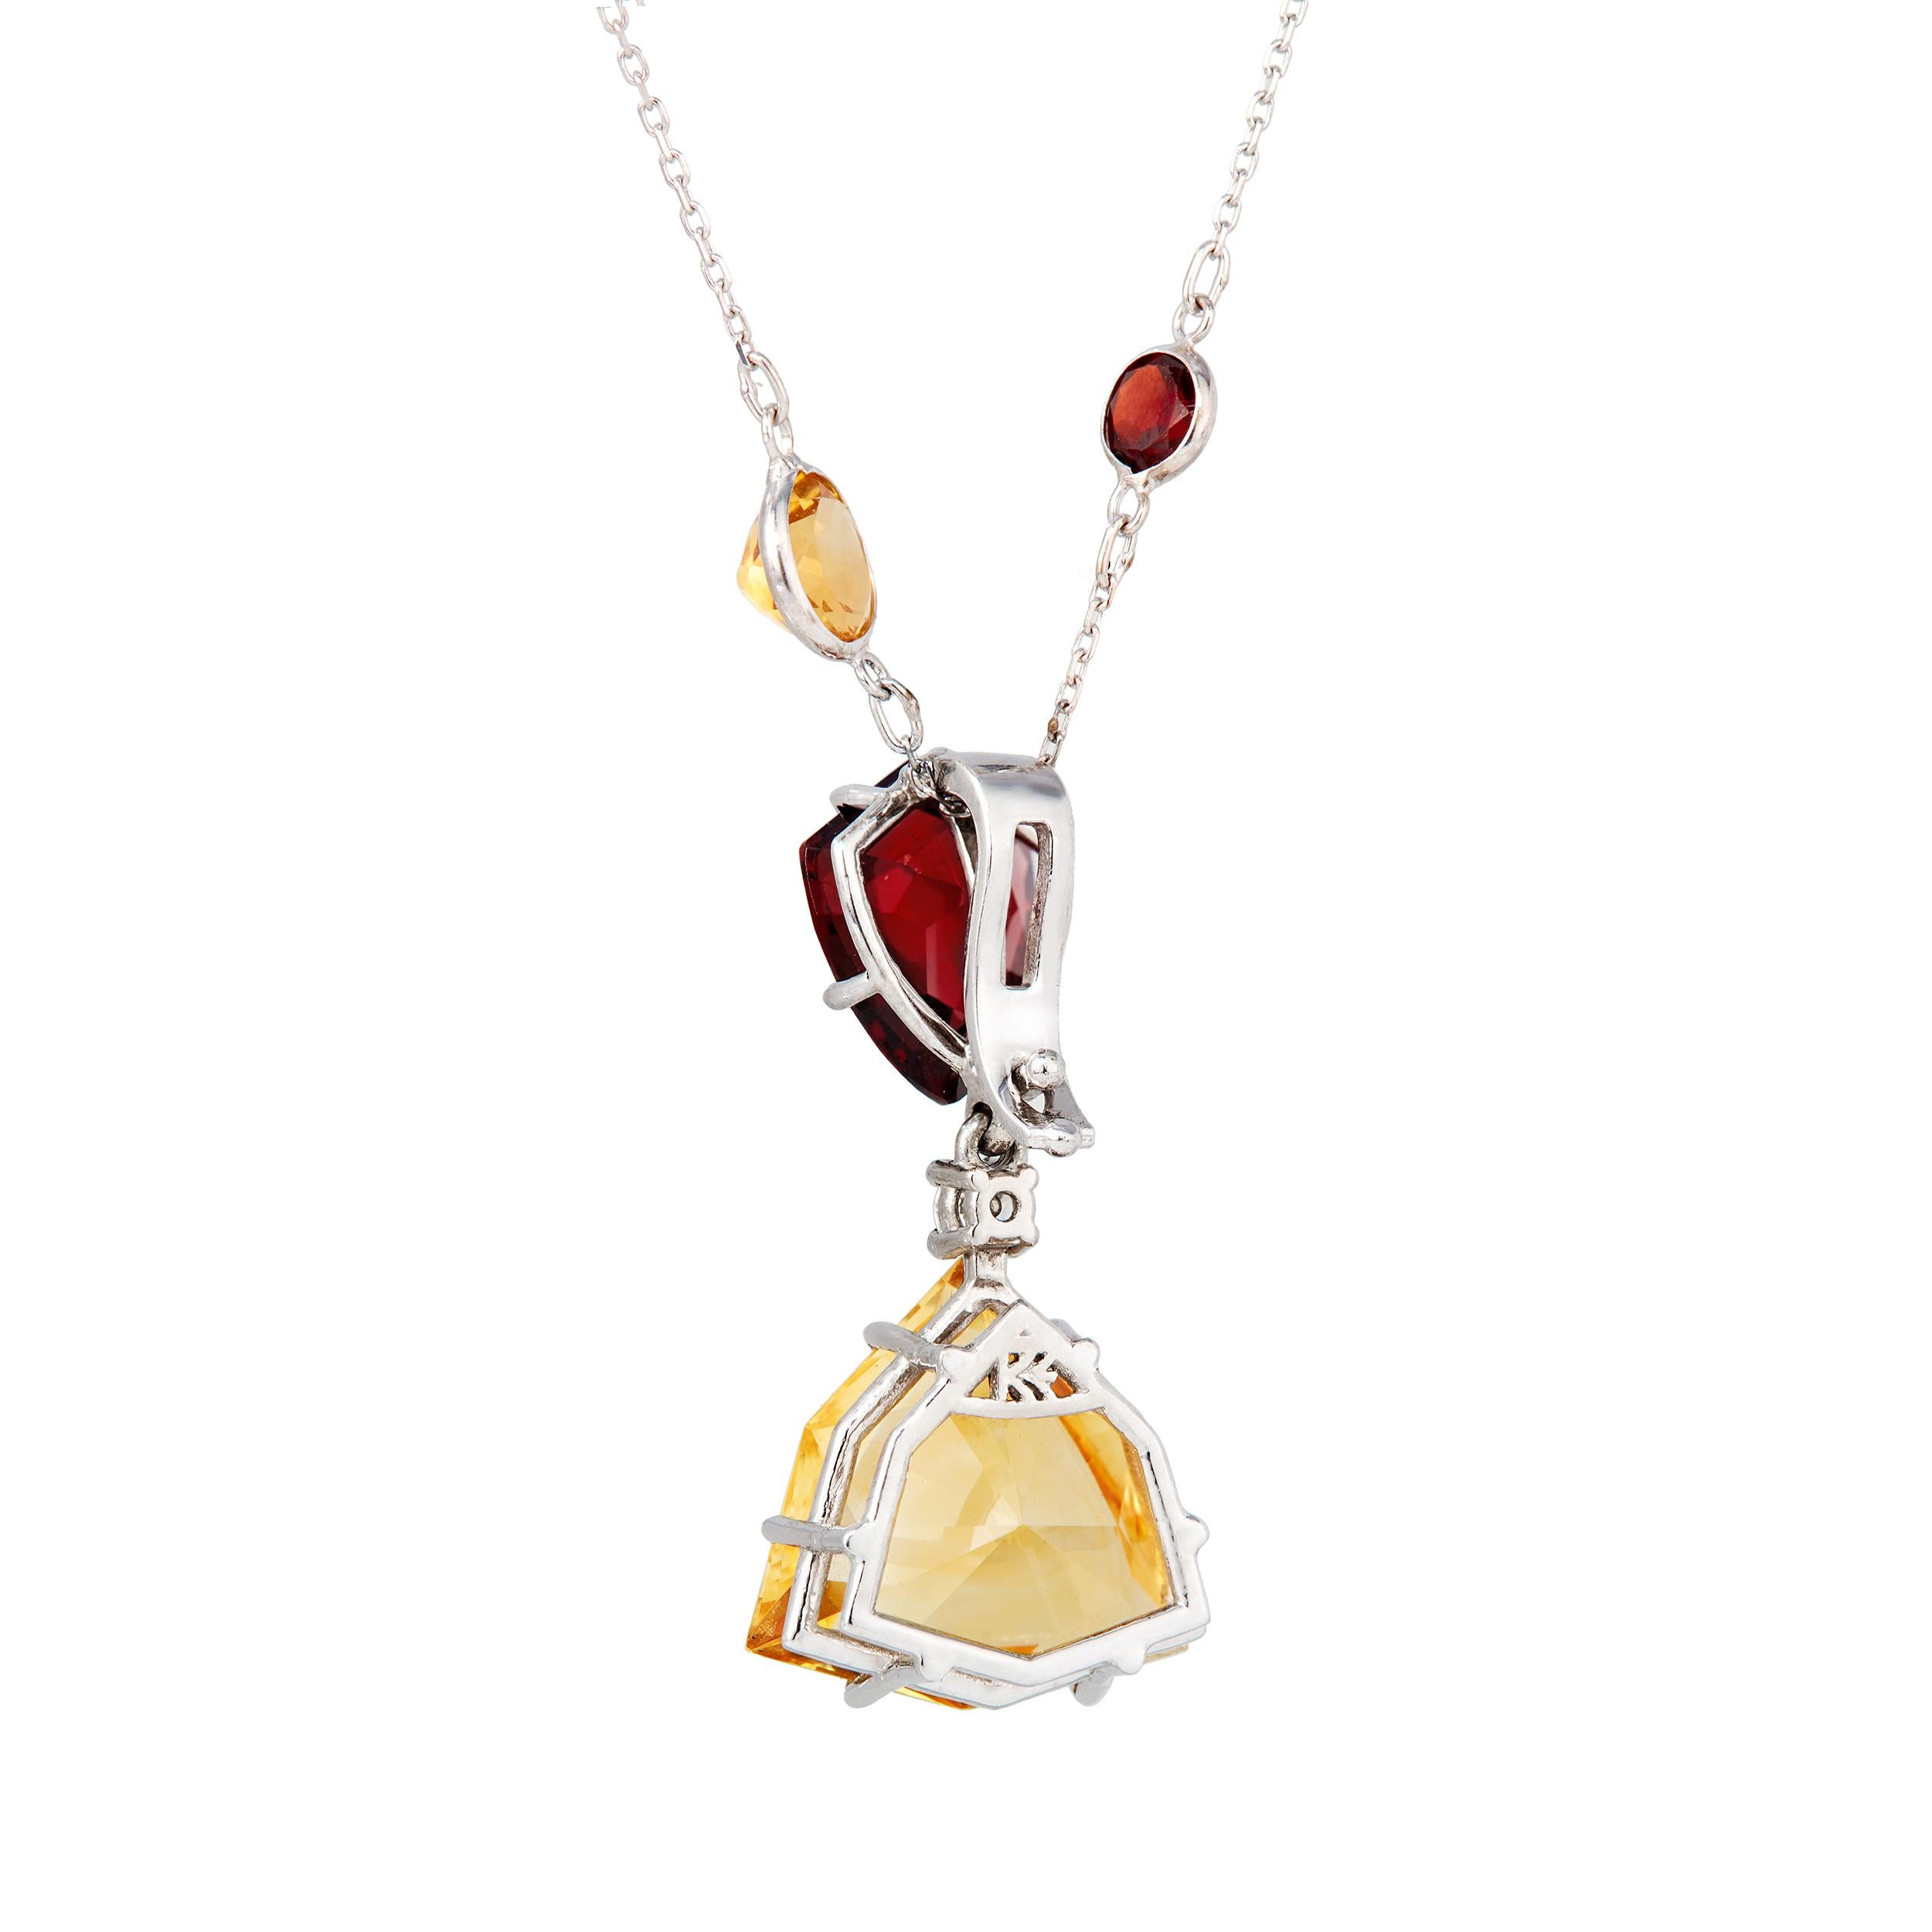 With 3 Modified Shield-shaped gemstones, this necklace has it's own kind of noble and powerful presence. The color combination of Garnet, Smokey Quartz, and this Honey-colored Citrine are sublime together. The 40